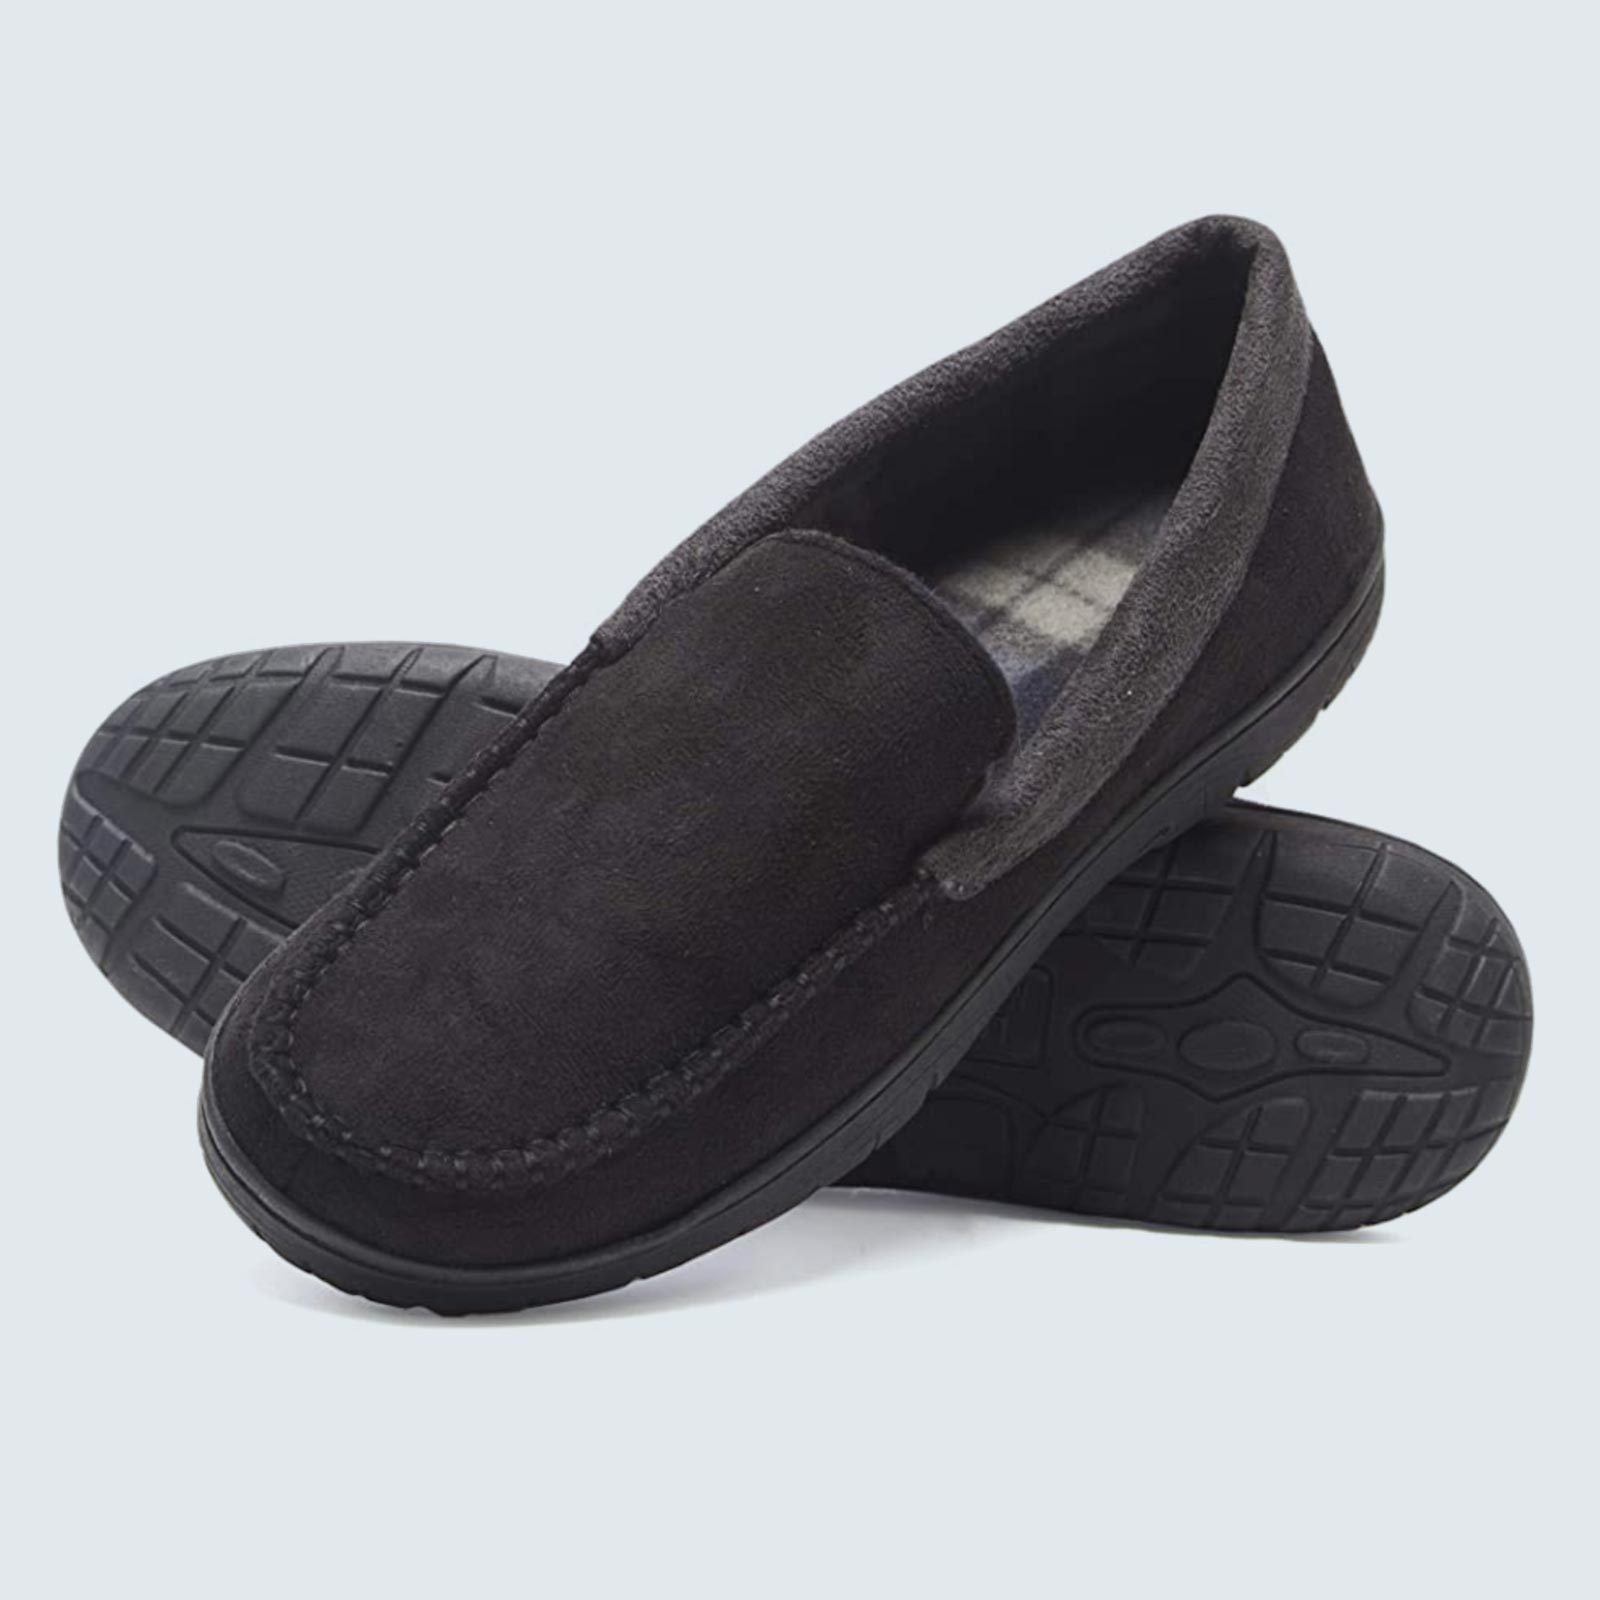 Best Men's Slippers 2021 | Comfy Men's Slippers for the House and More